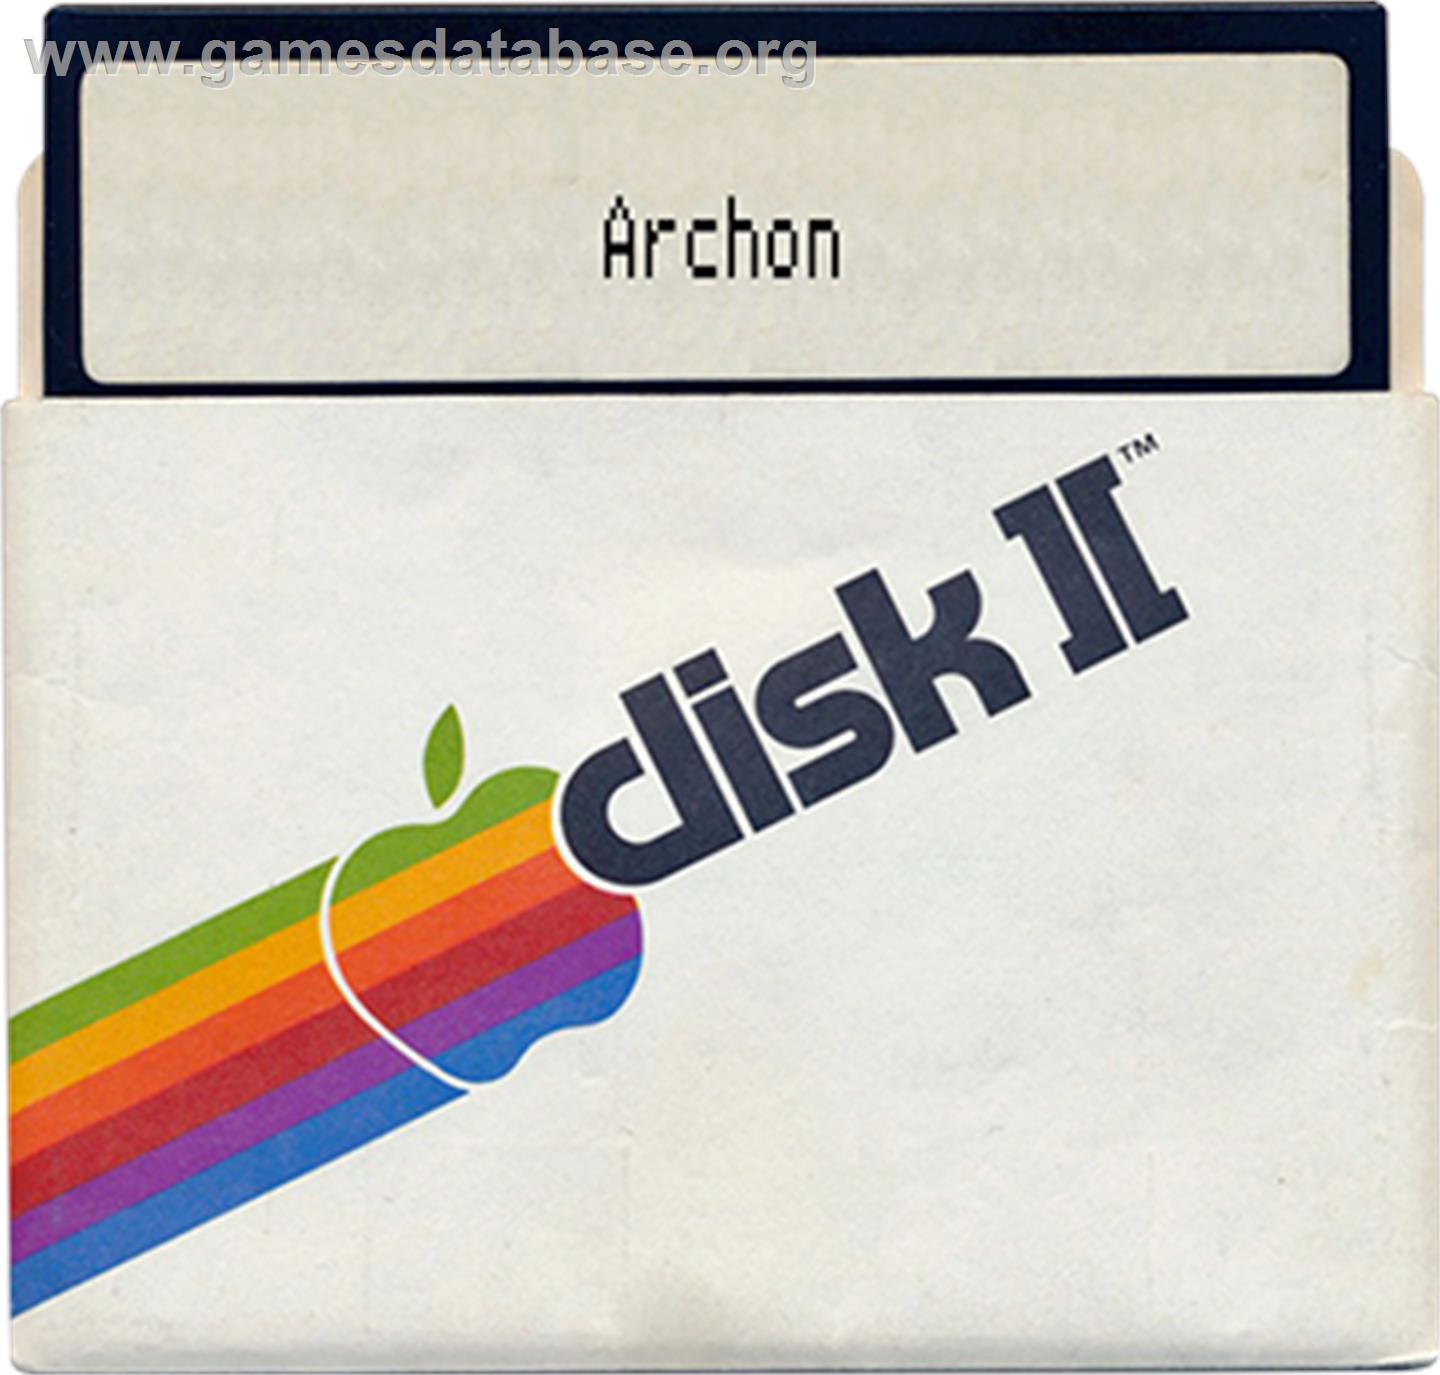 Archon: The Light and the Dark - Apple II - Artwork - Disc